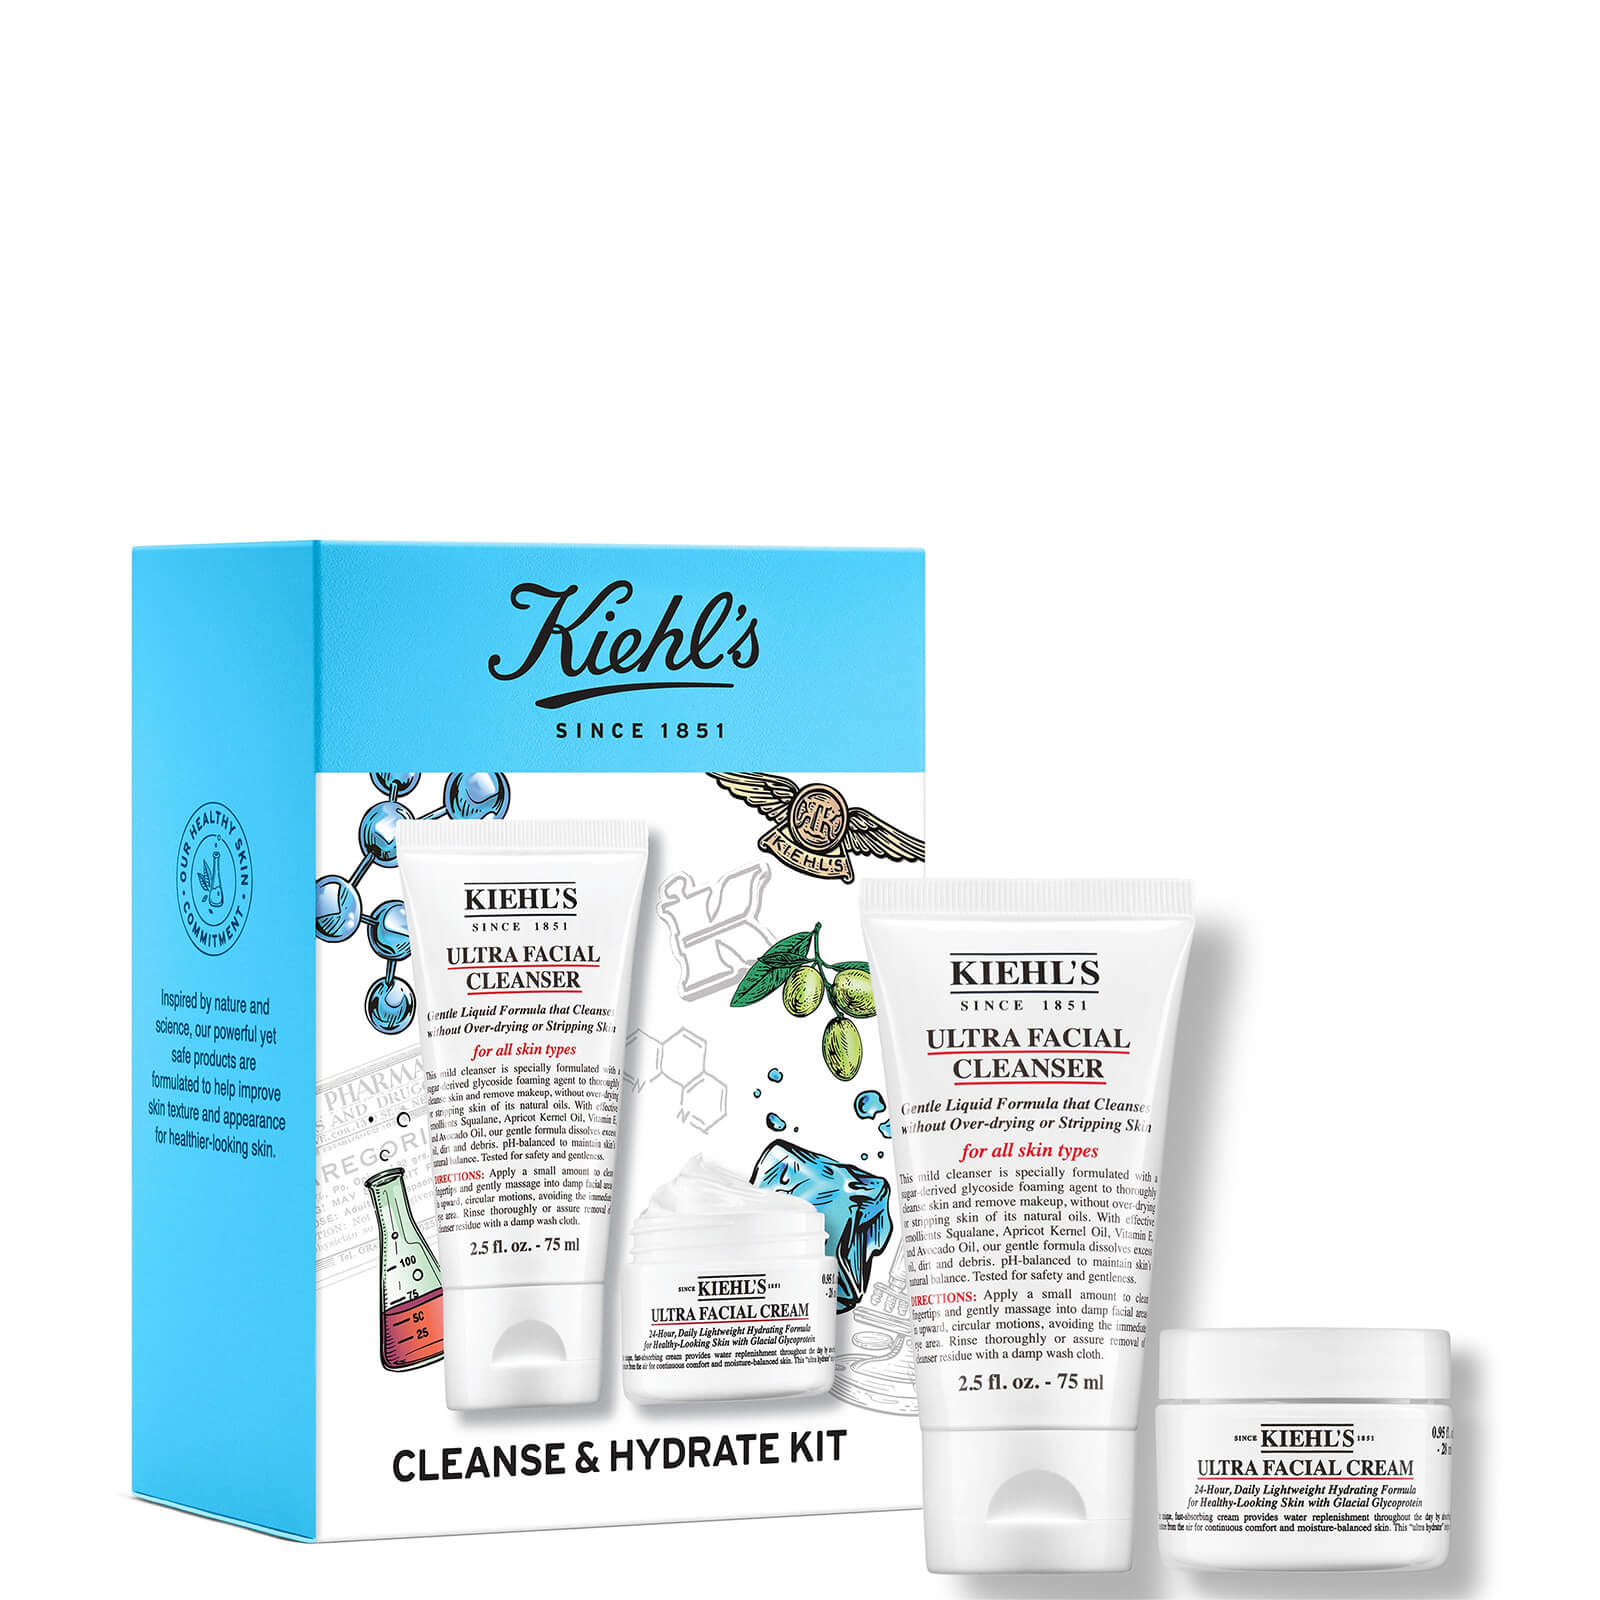 Kiehl's Cleanse and Hydrate Kit 28ml